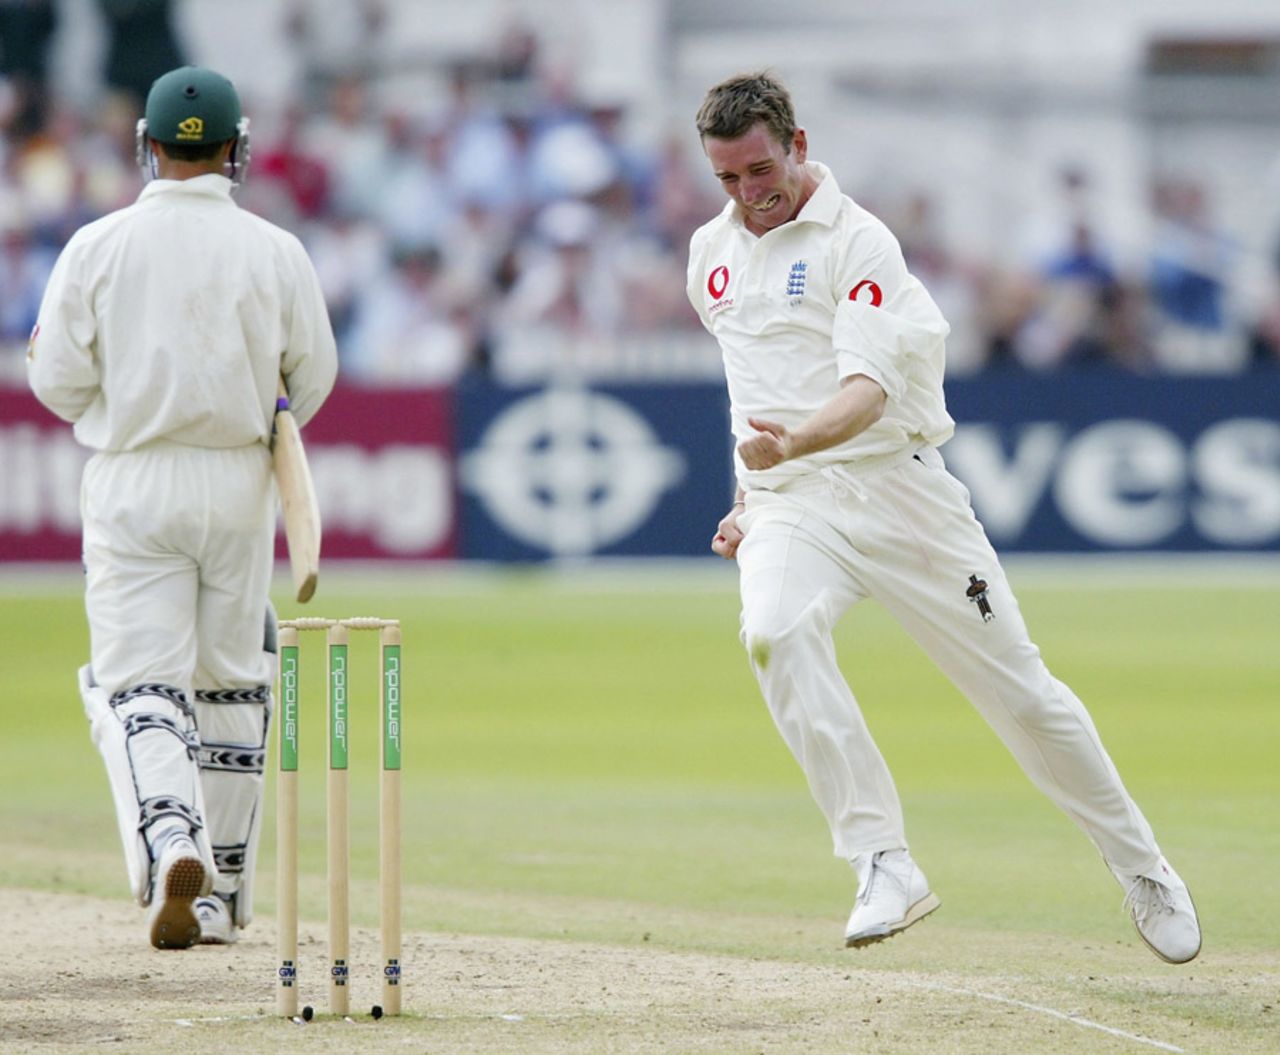 James Kirtley celebrates the wicket of Mark Boucher, England v South Africa, third Test, Trent Bridge, August 18, 2003